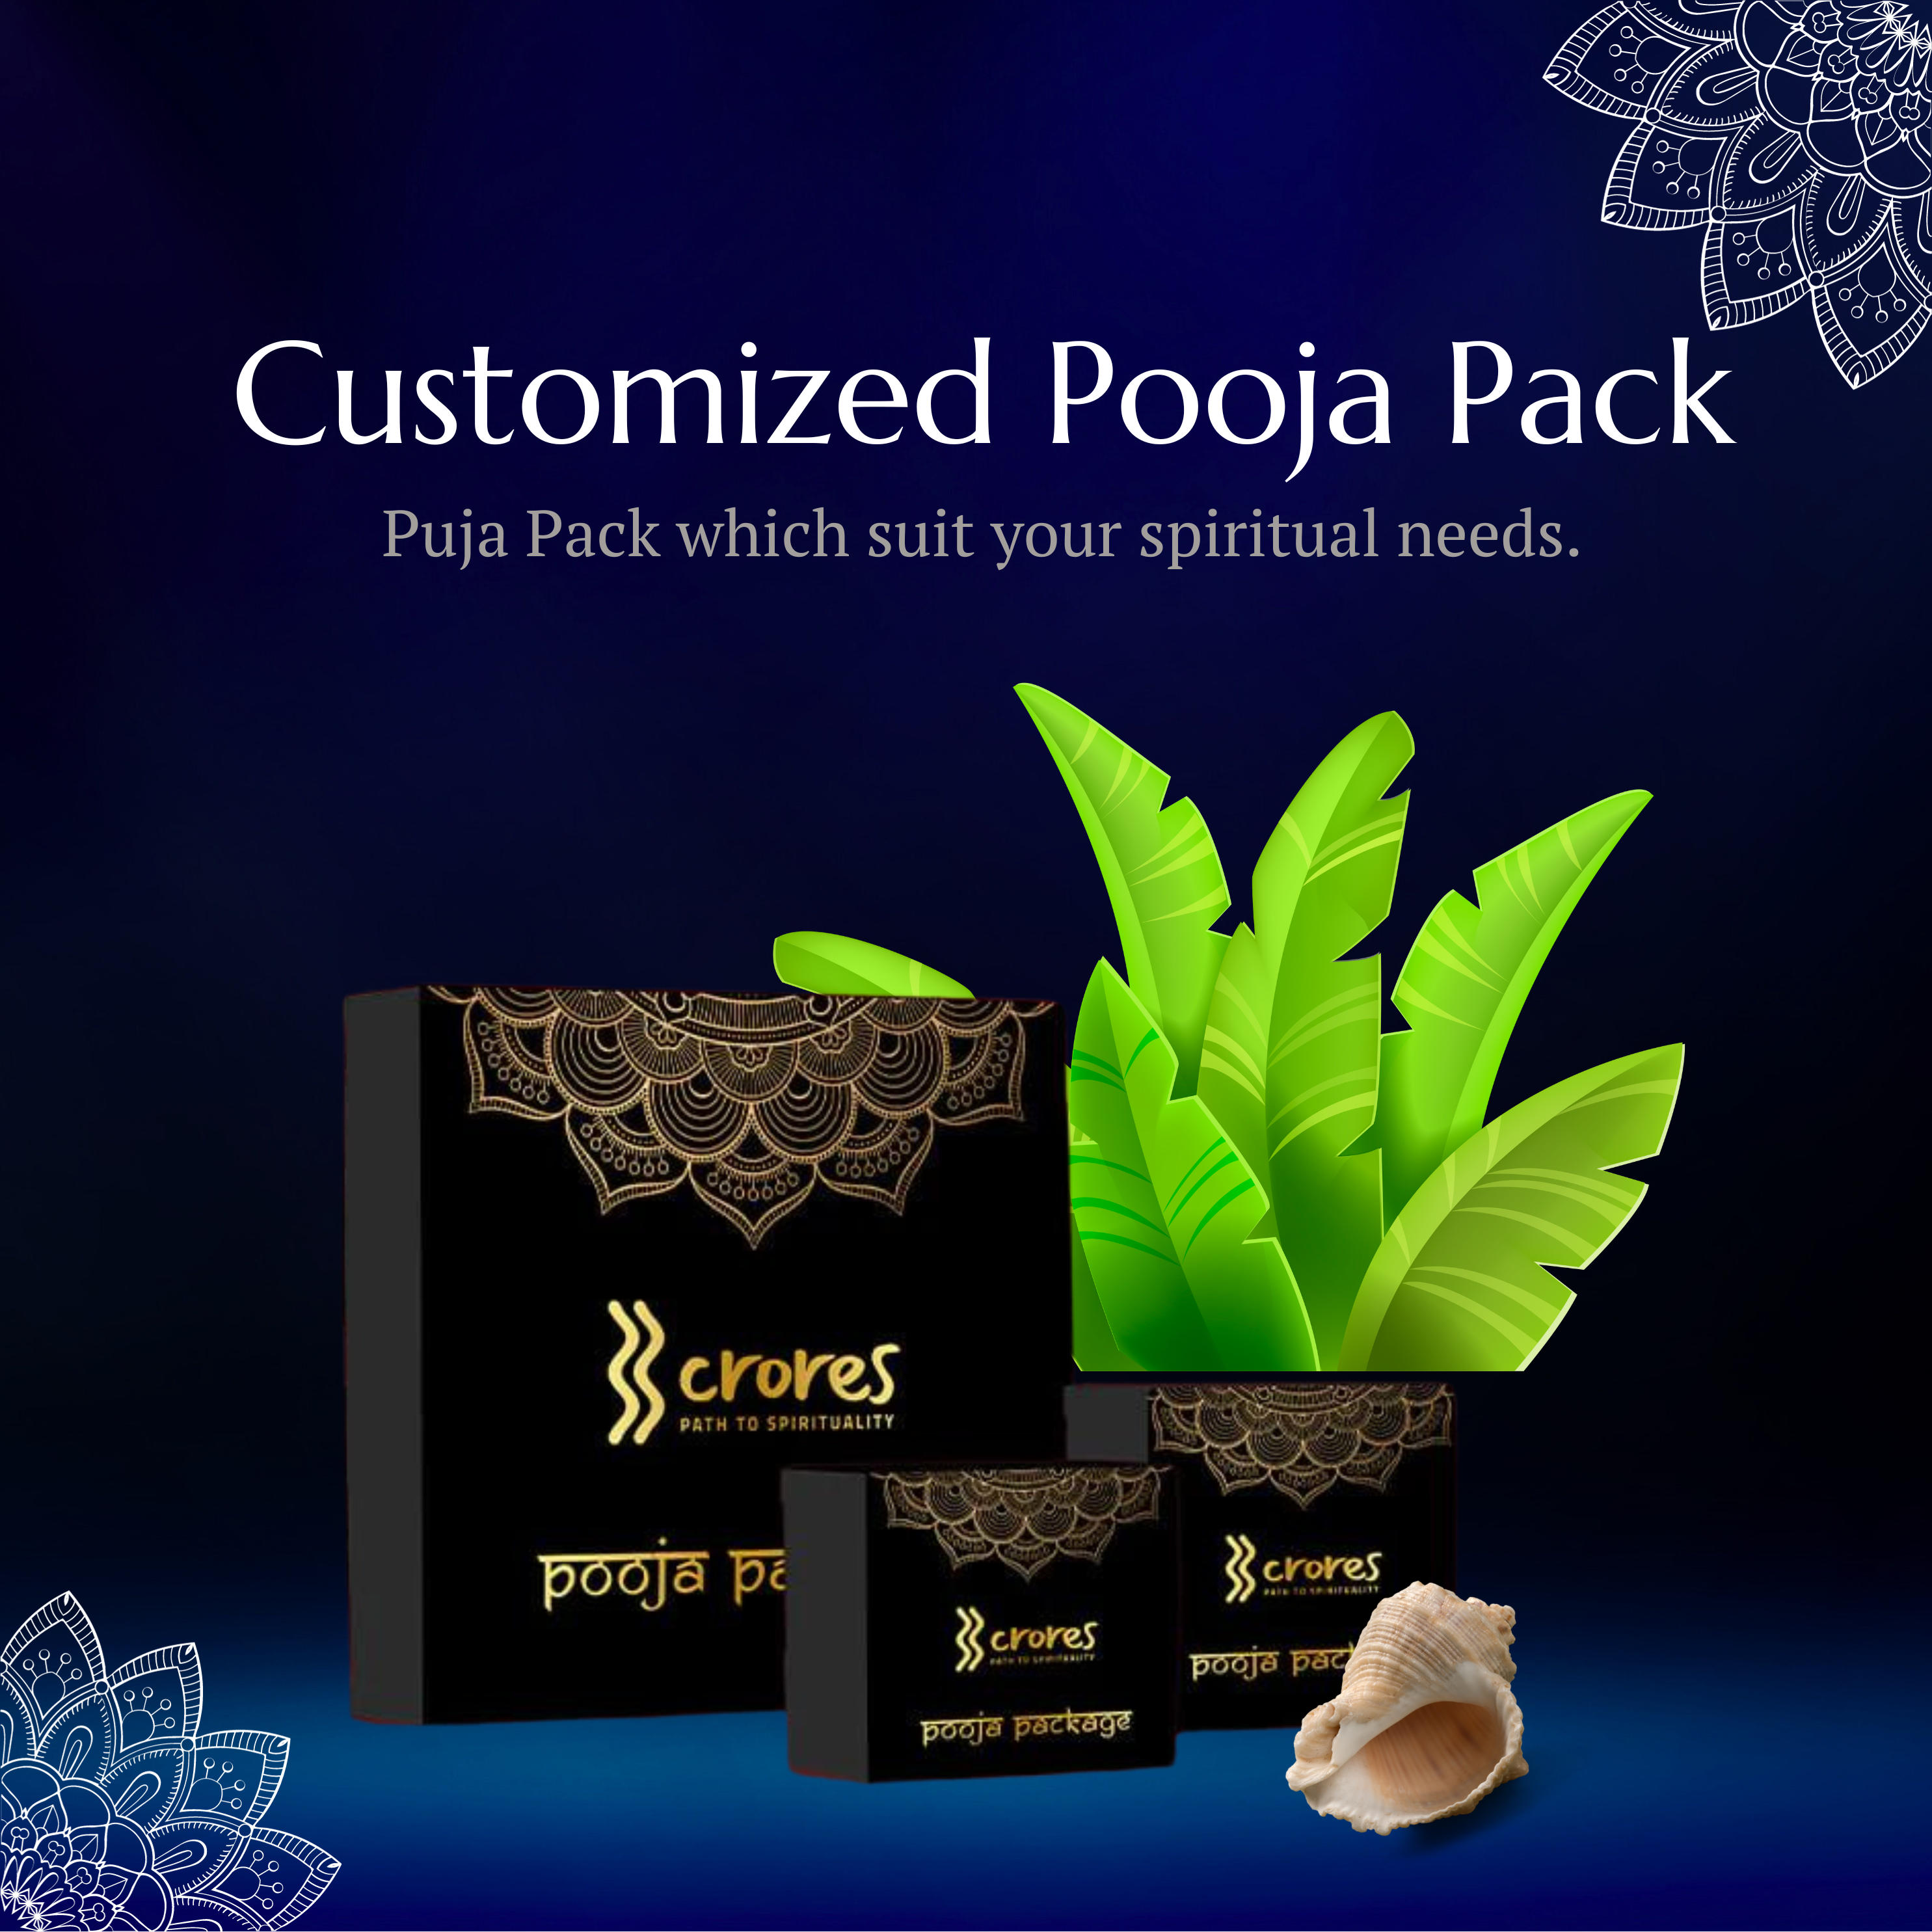 Customized Puja Pack